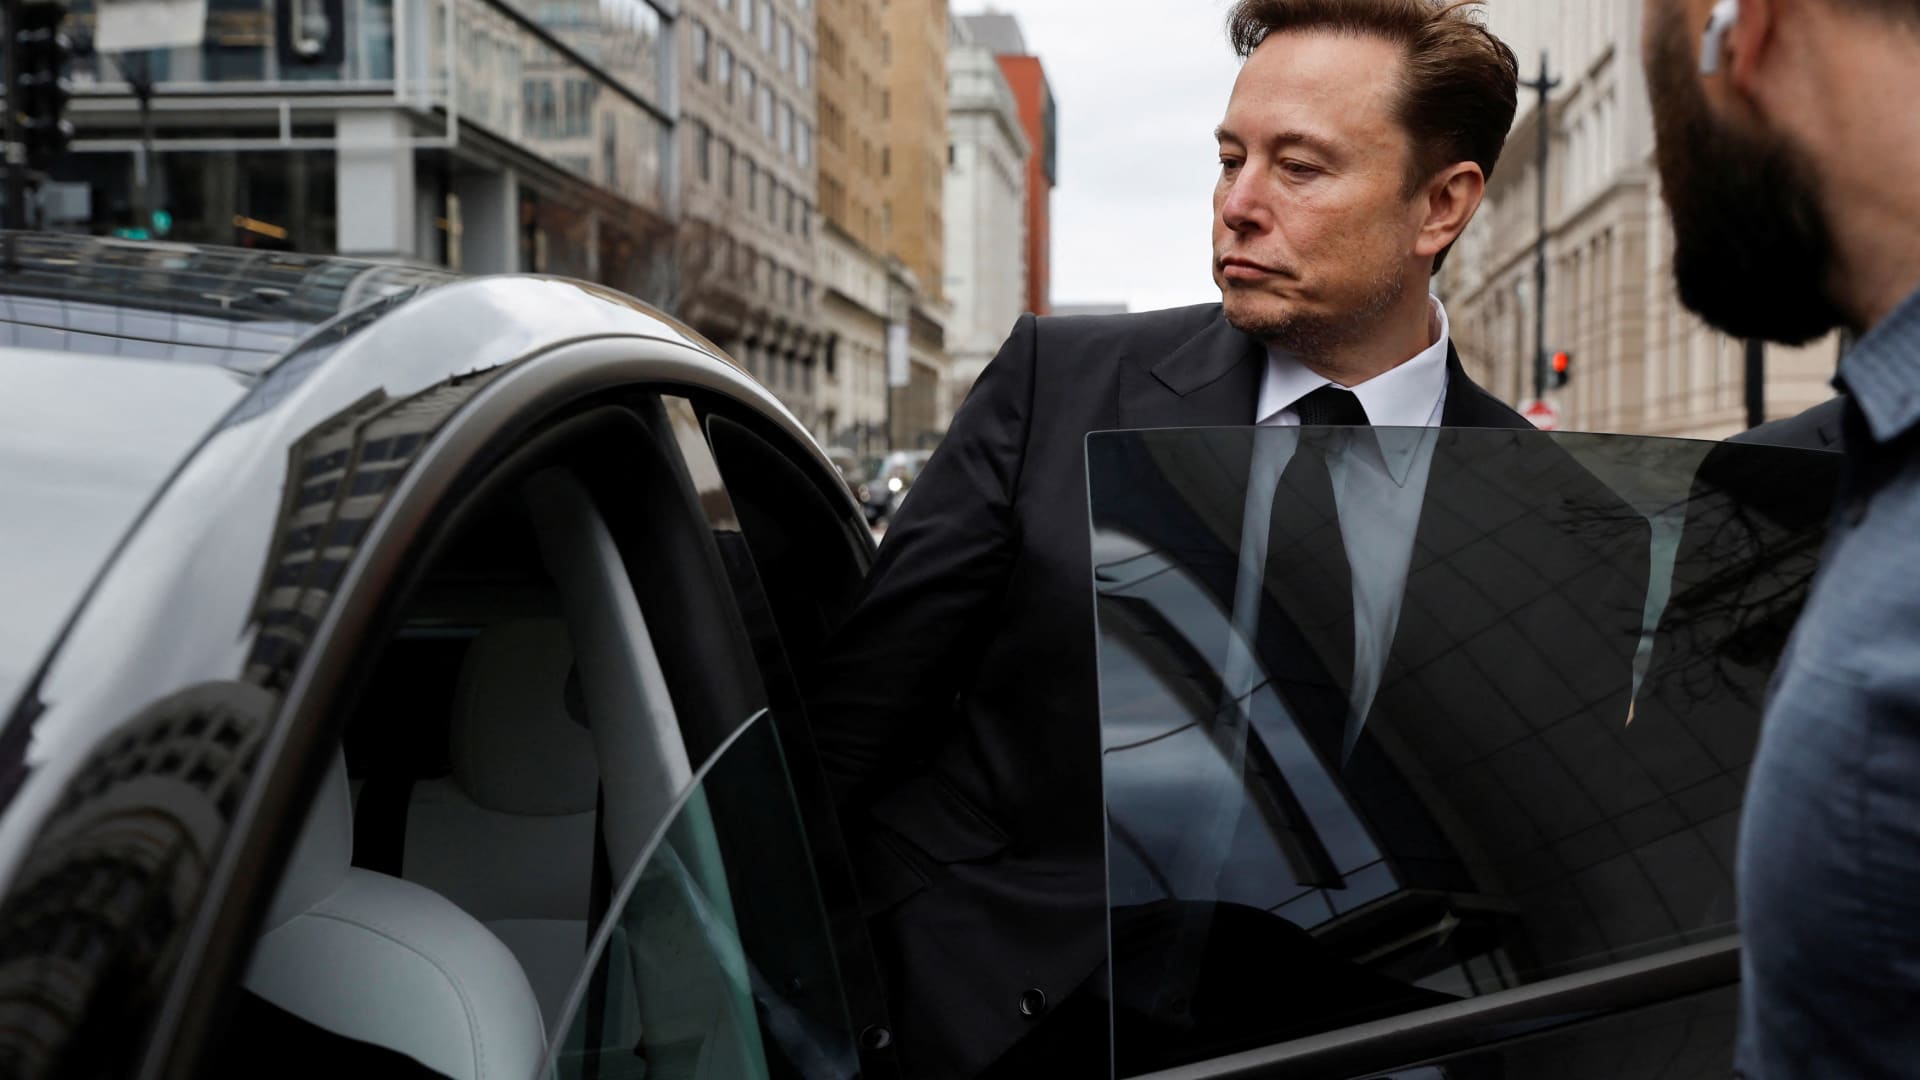 Musk, Tesla not liable in securities class action suit